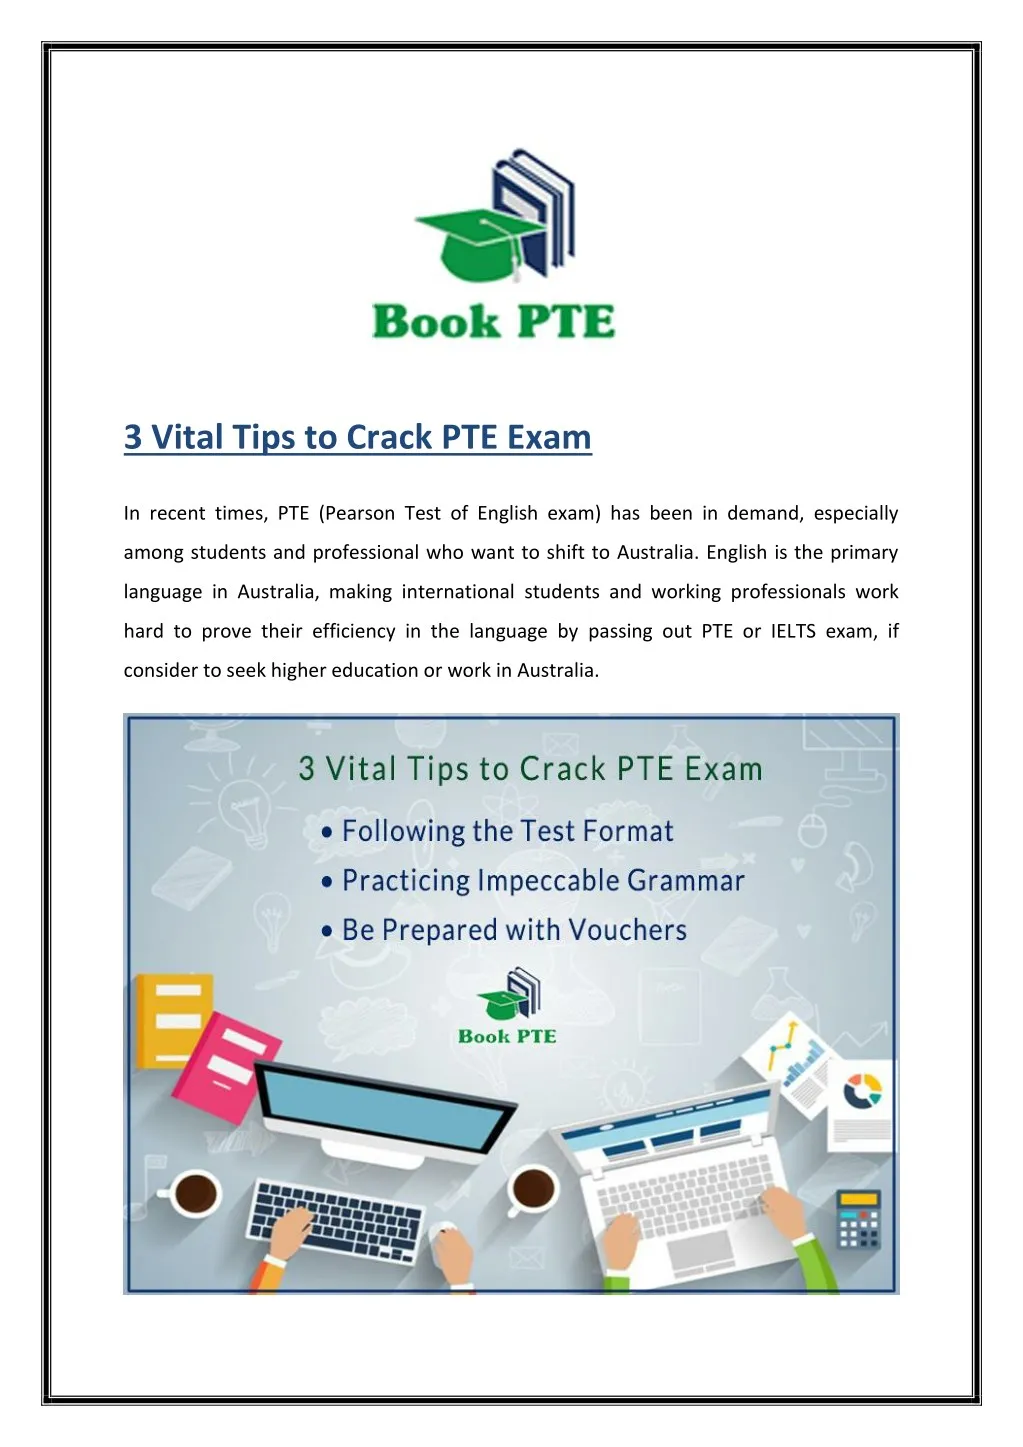 3 vital tips to crack pte exam